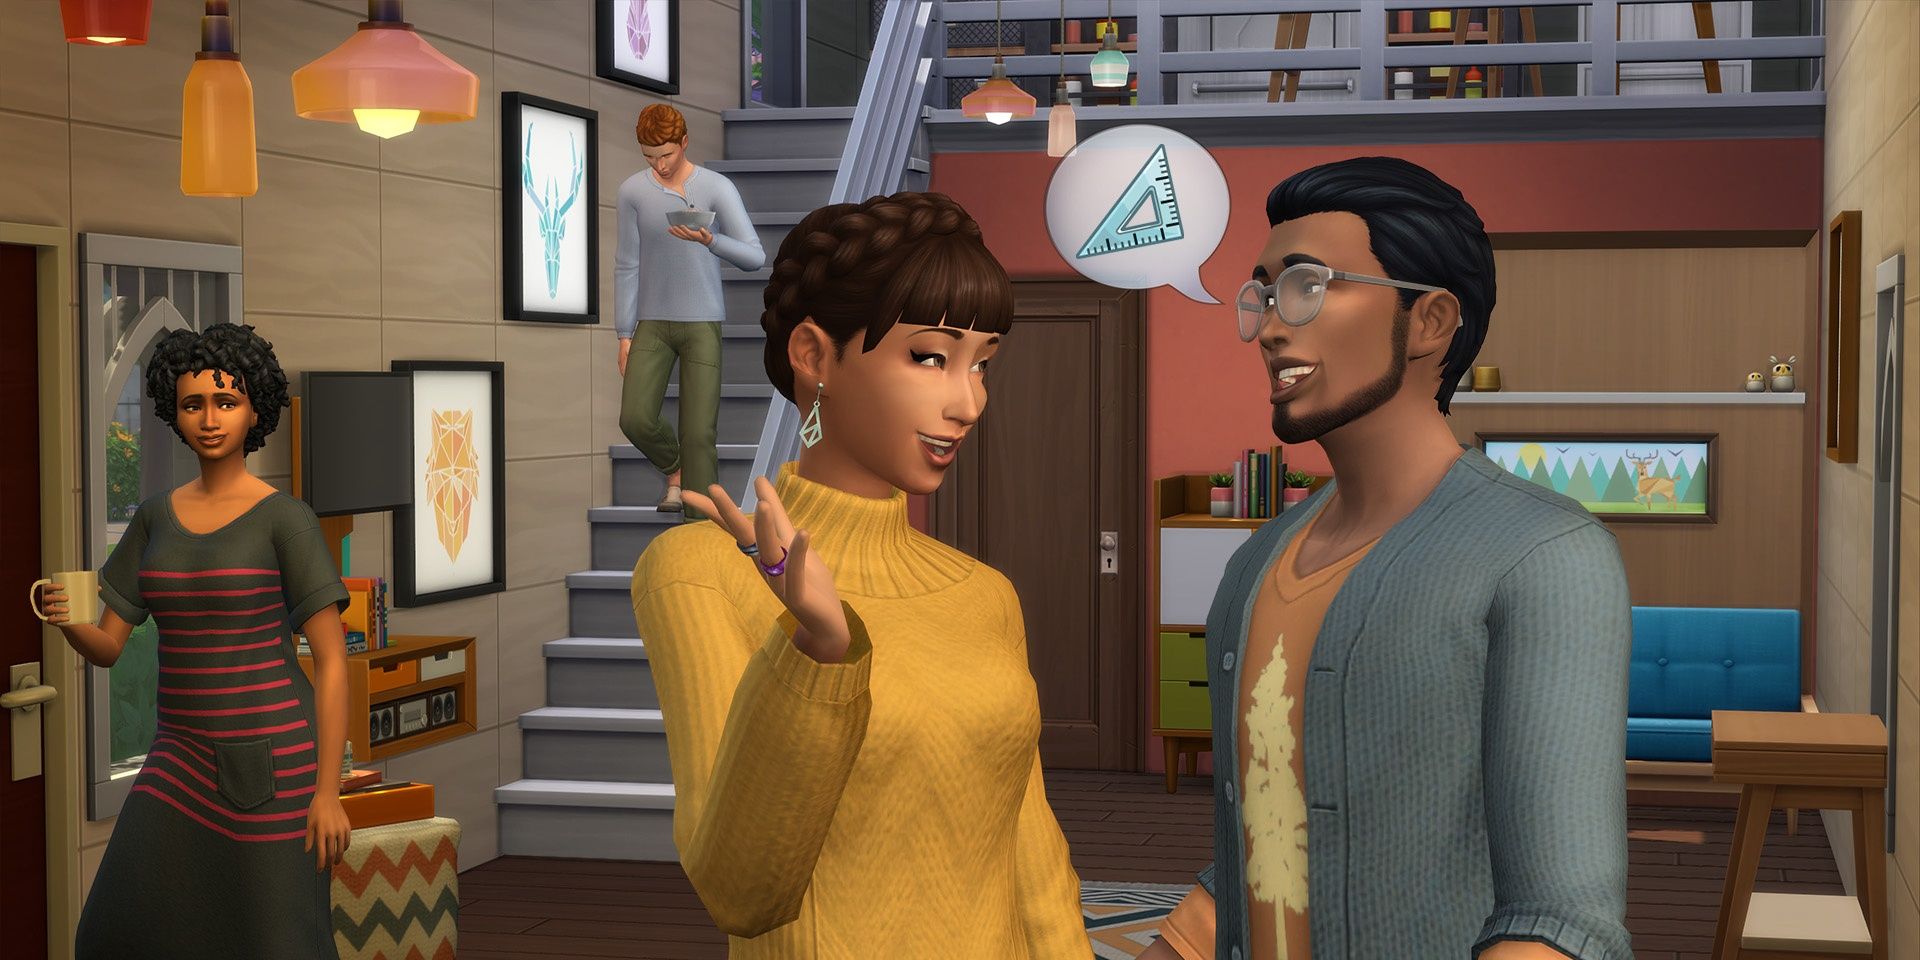 Two Sims chat about...well, it's not clear exactly what they're talking about. One Sim's thought bubble has the perfectionist symbol, though, so maybe they're networking?